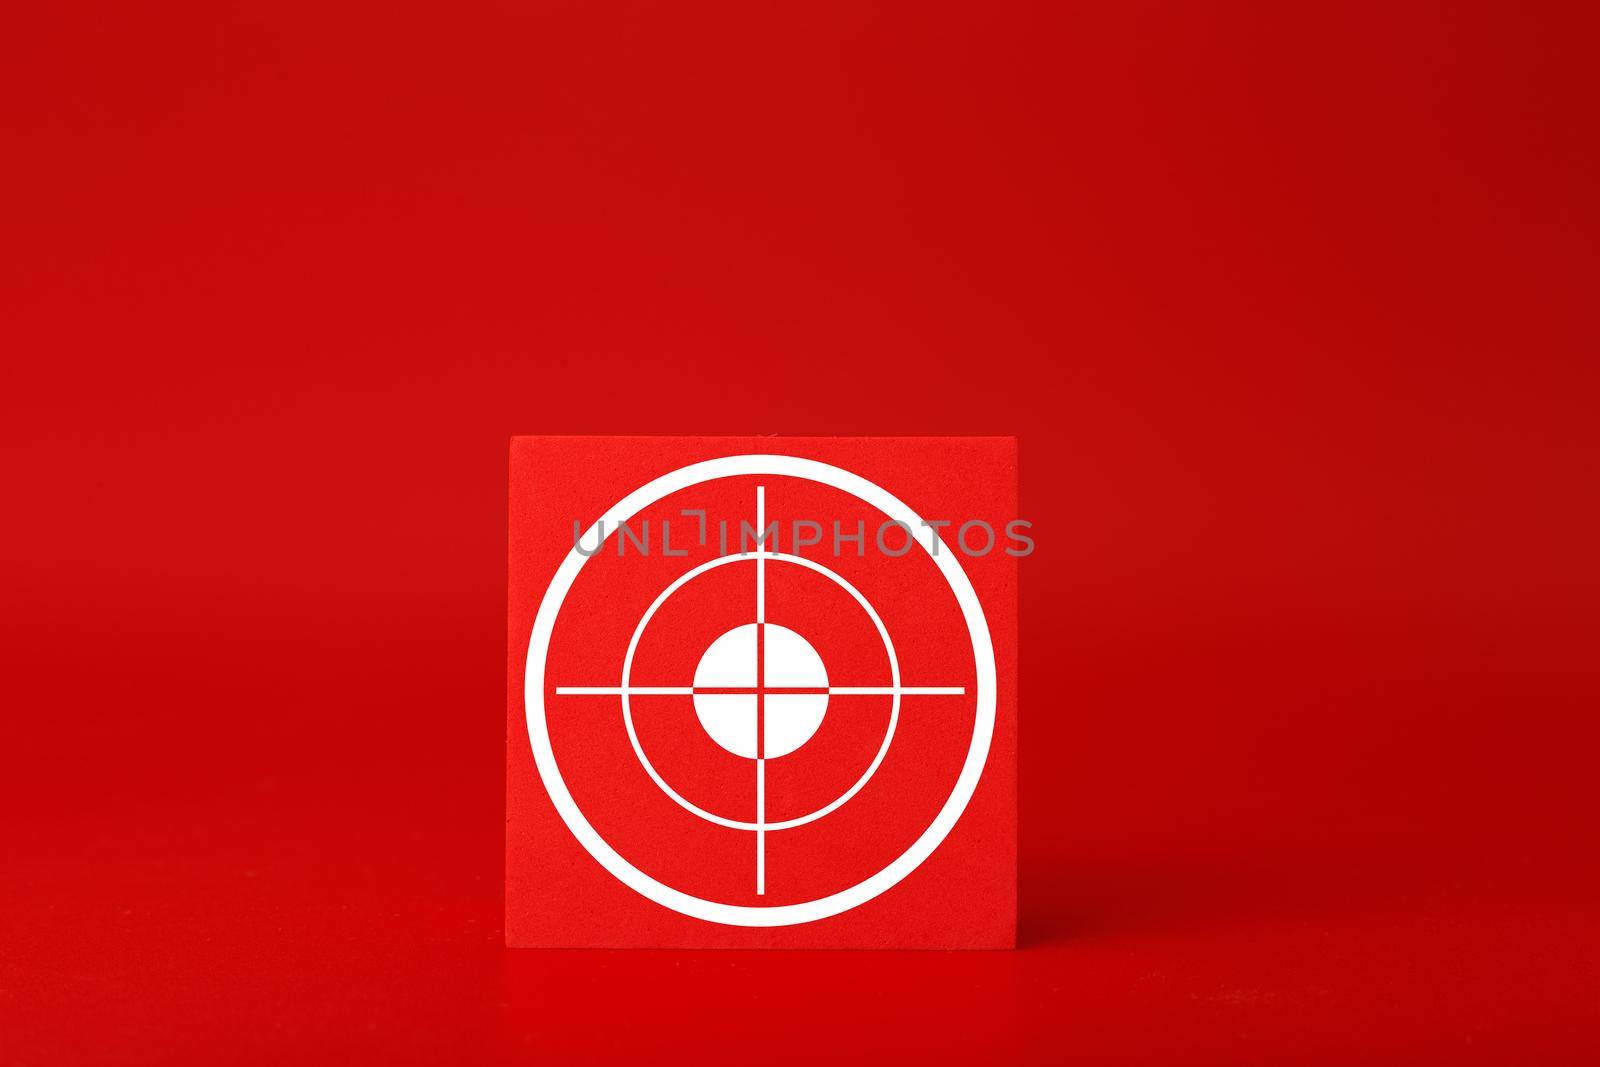 Goal or target symbol on red cube in the middle of red background. Concept of scoring and setting a goal by Senorina_Irina